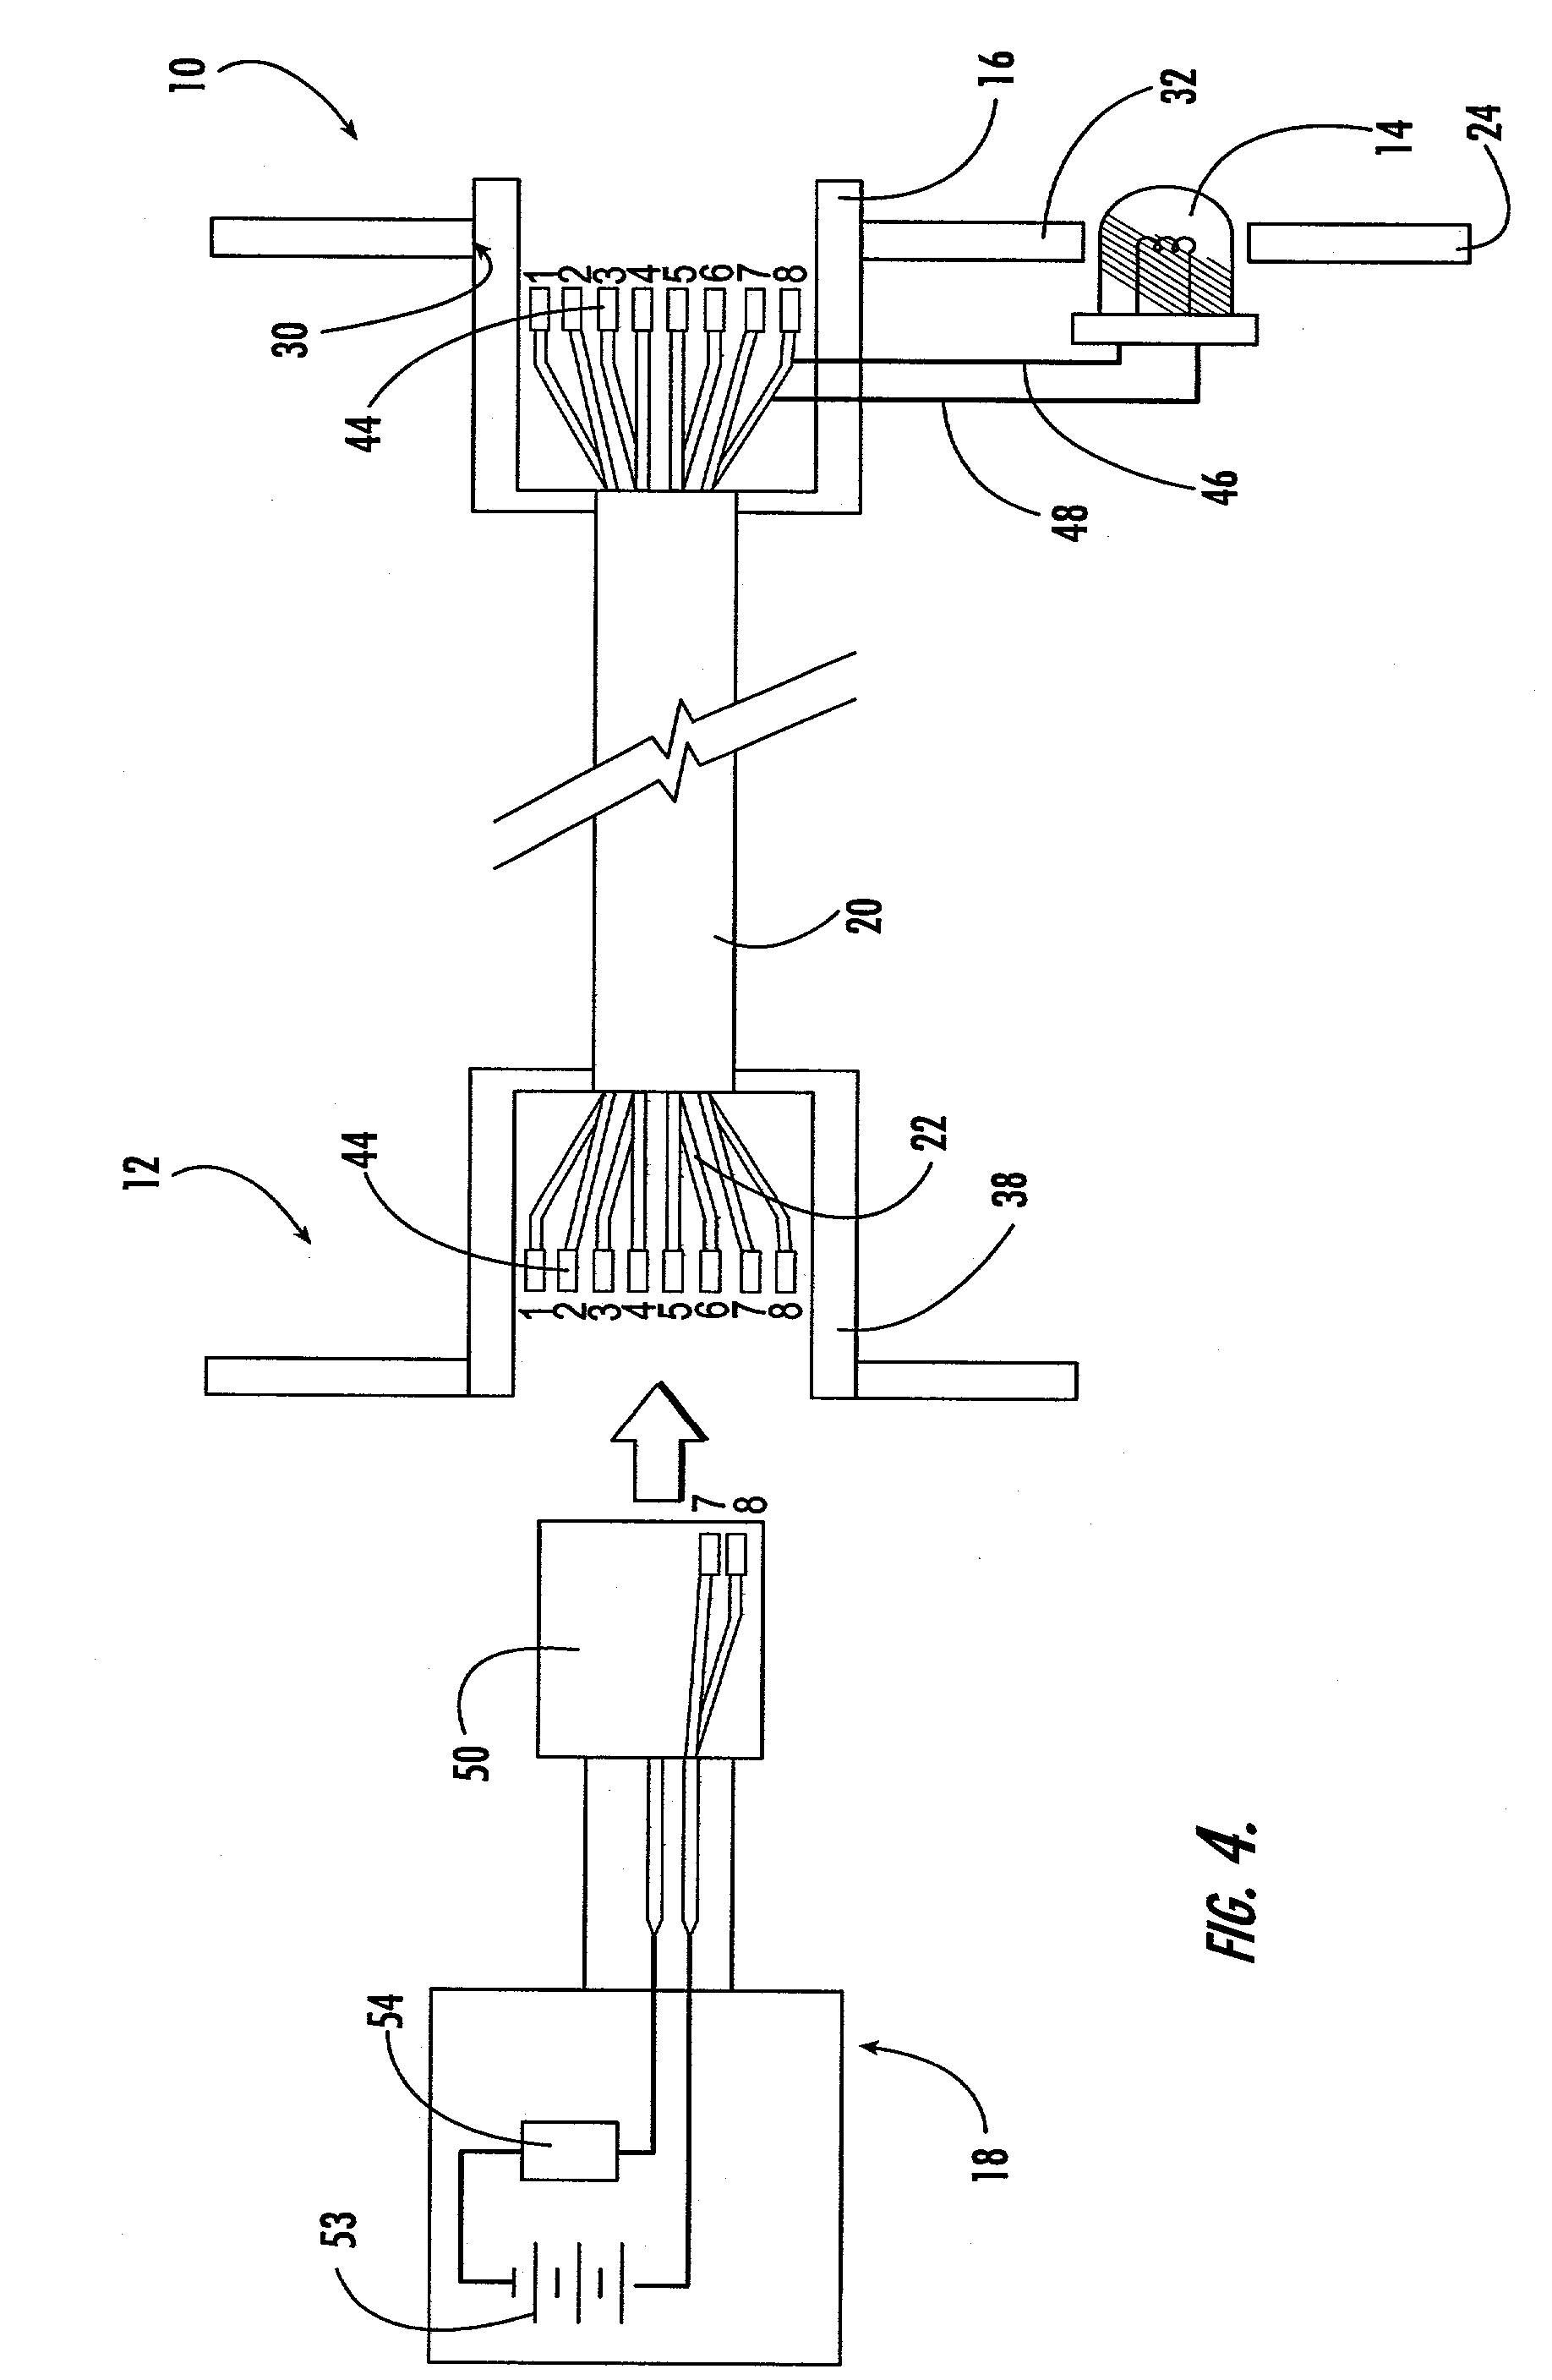 Testing assembly and method for identifying network circuits